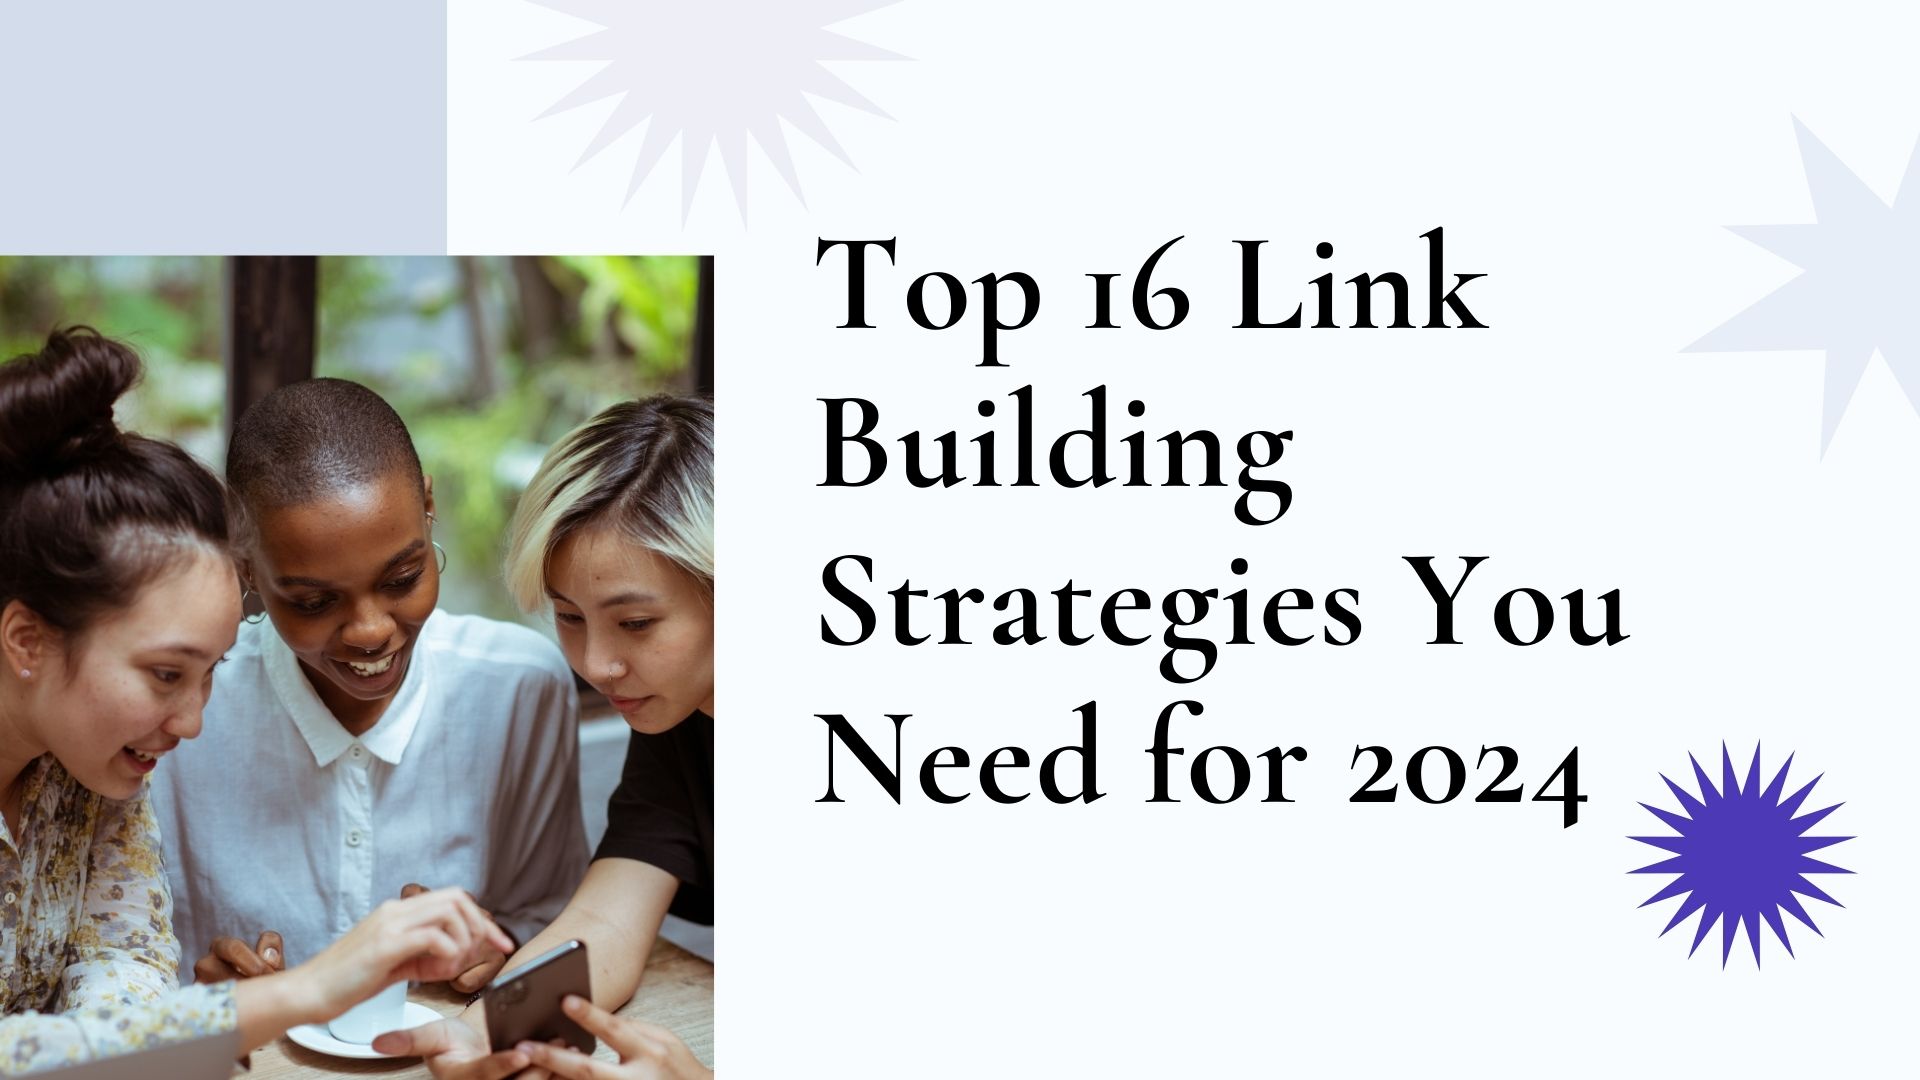 Top 16 Link Building Strategies You Need for 2024